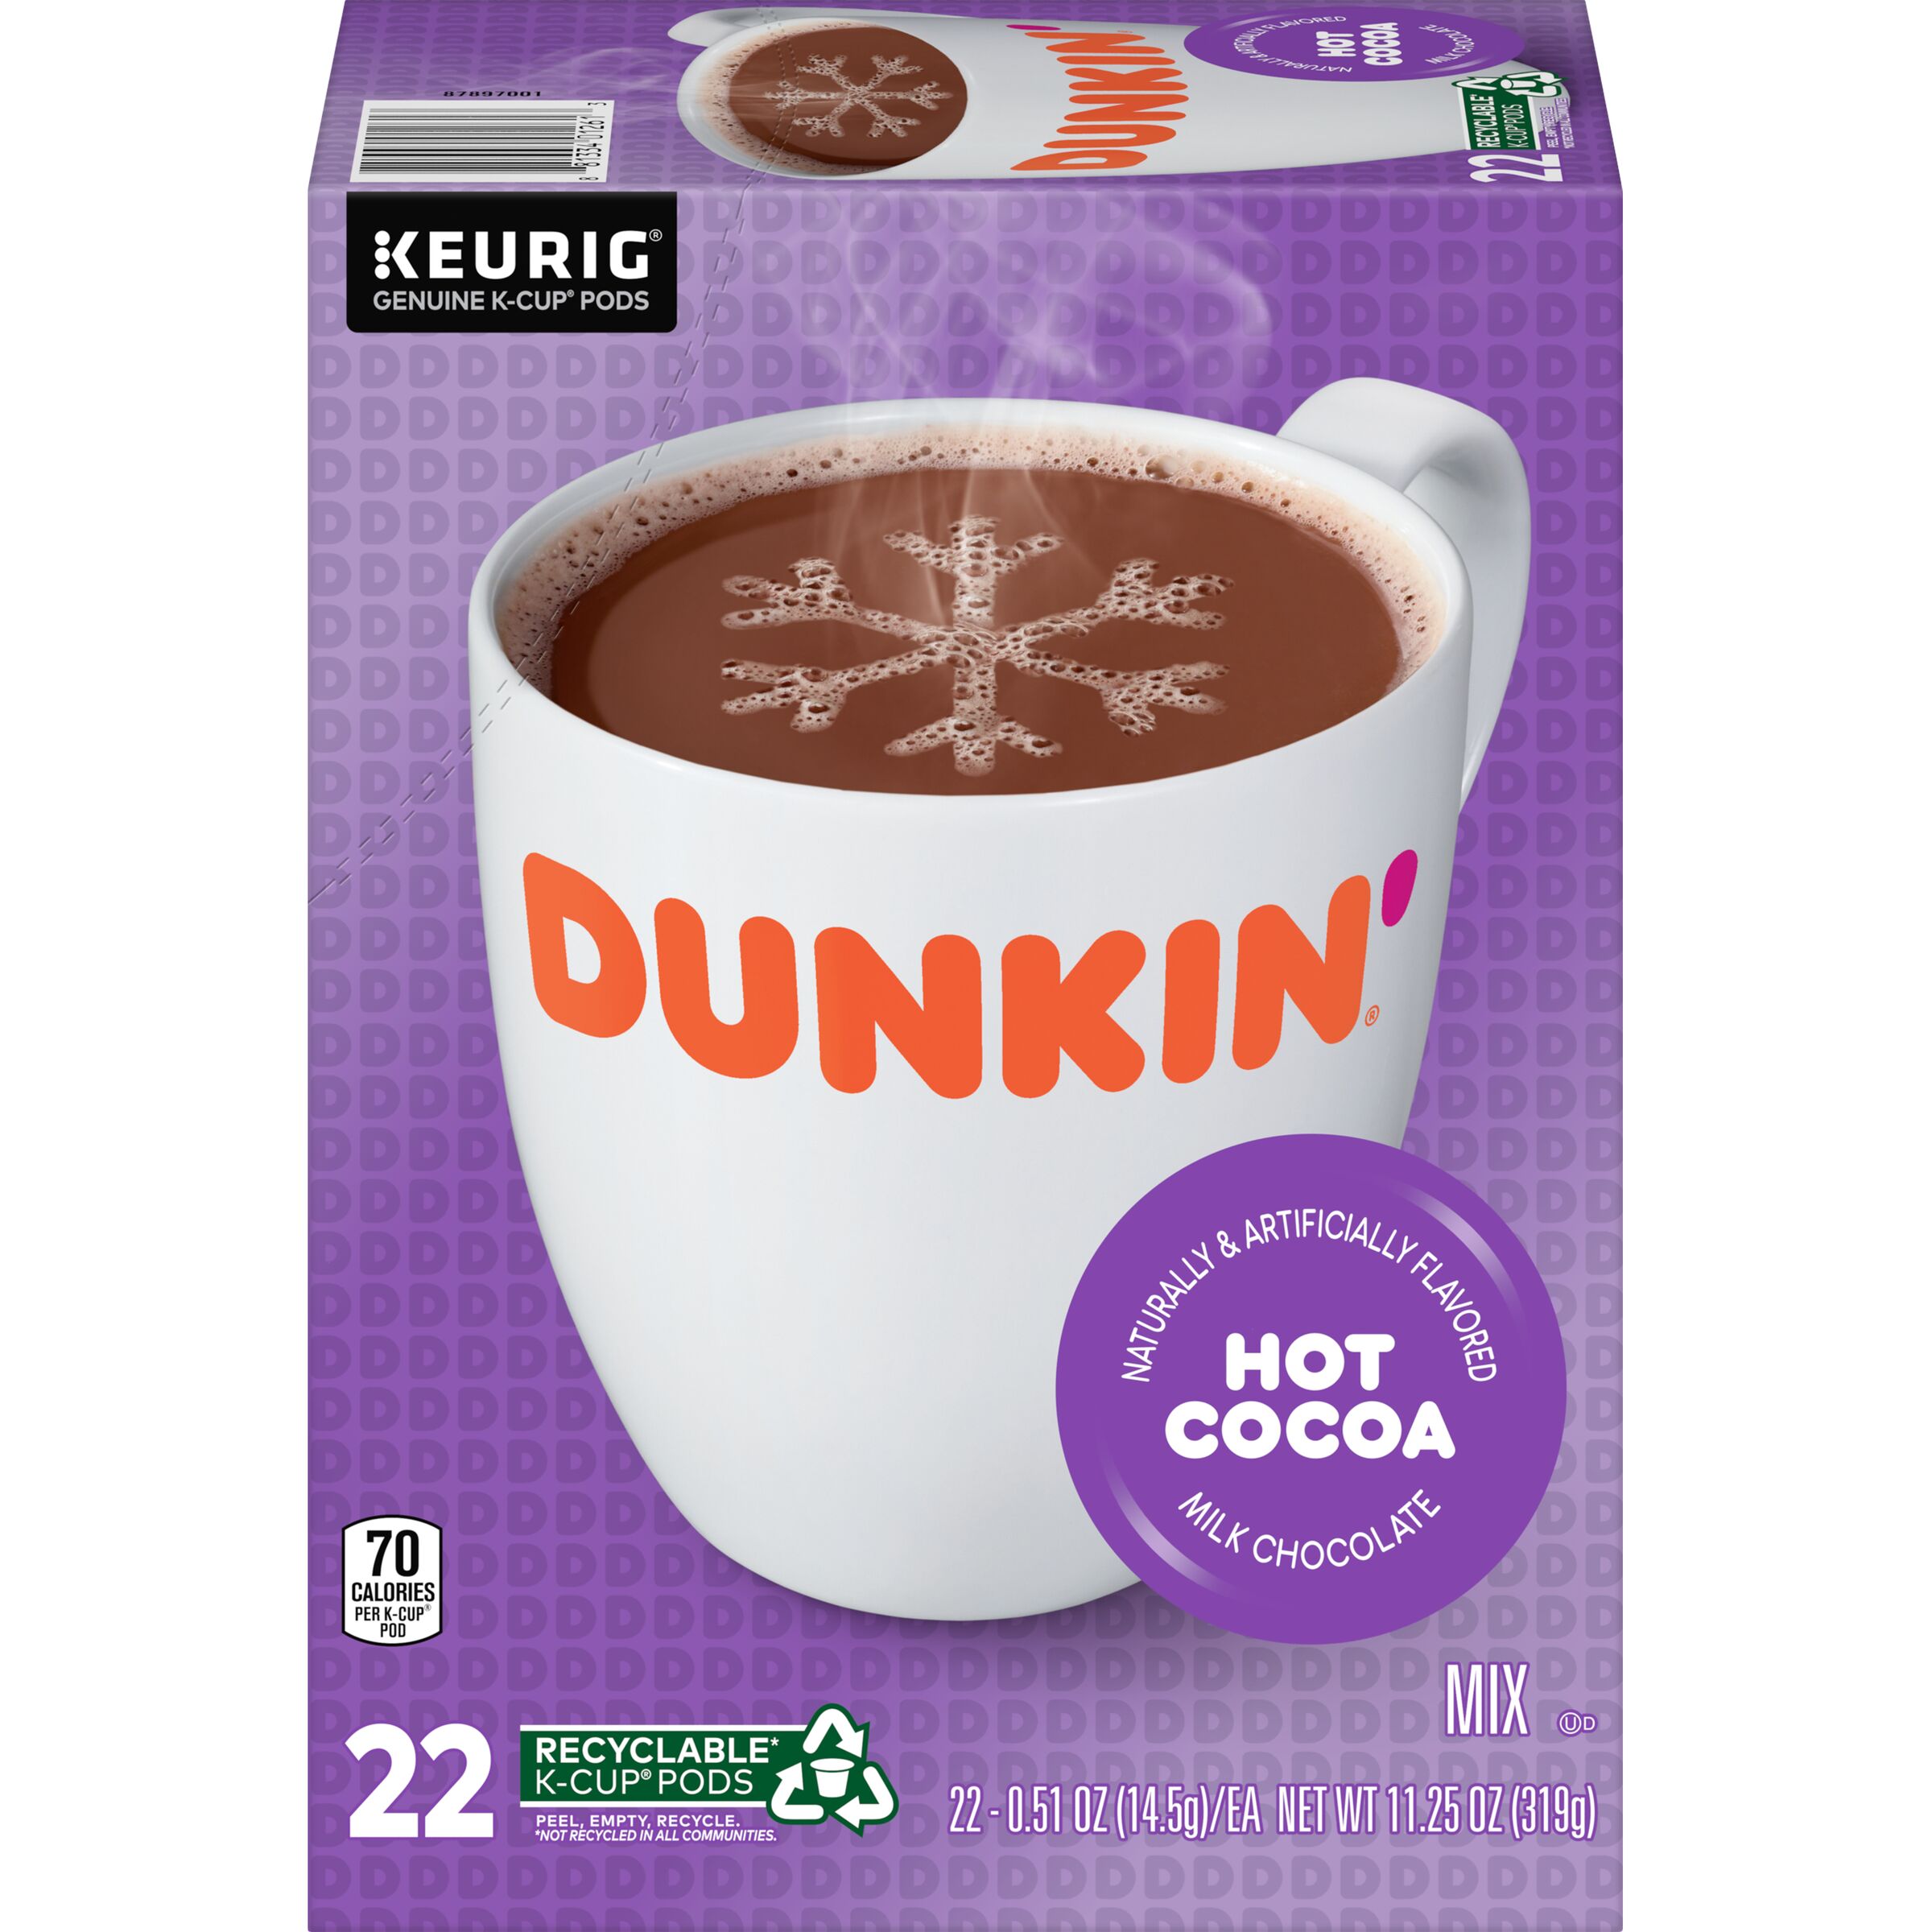 Dunkin' Hot Cocoa, Keurig K-Cup Pods, 22 Count Box - image 1 of 6